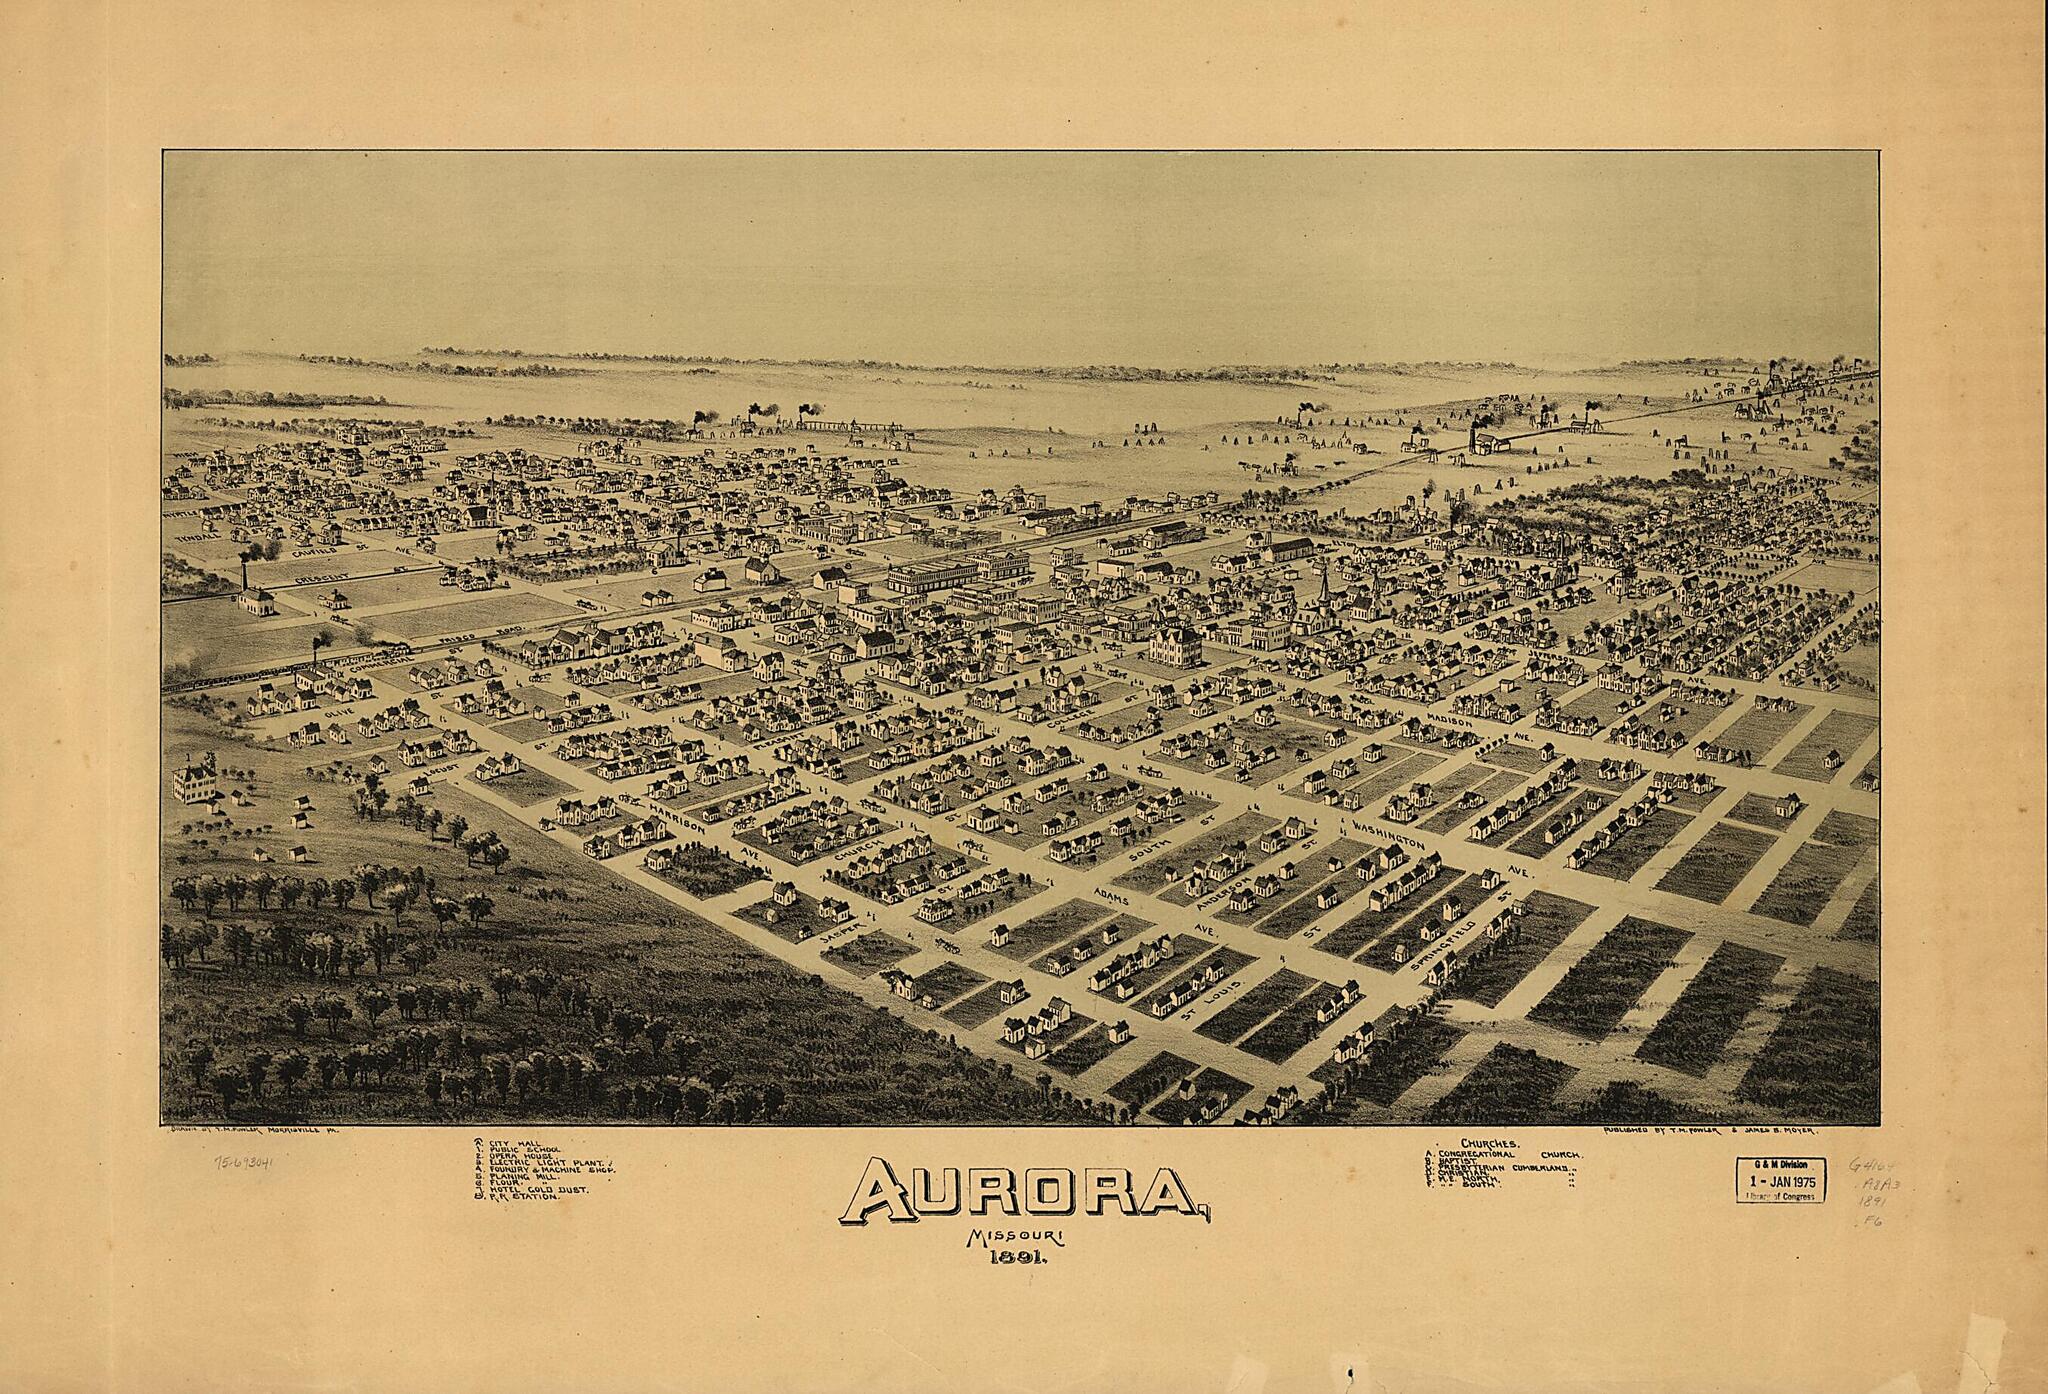 This old map of Aurora, Missouri from 1891 was created by T. M. (Thaddeus Mortimer) Fowler, James B. Moyer in 1891